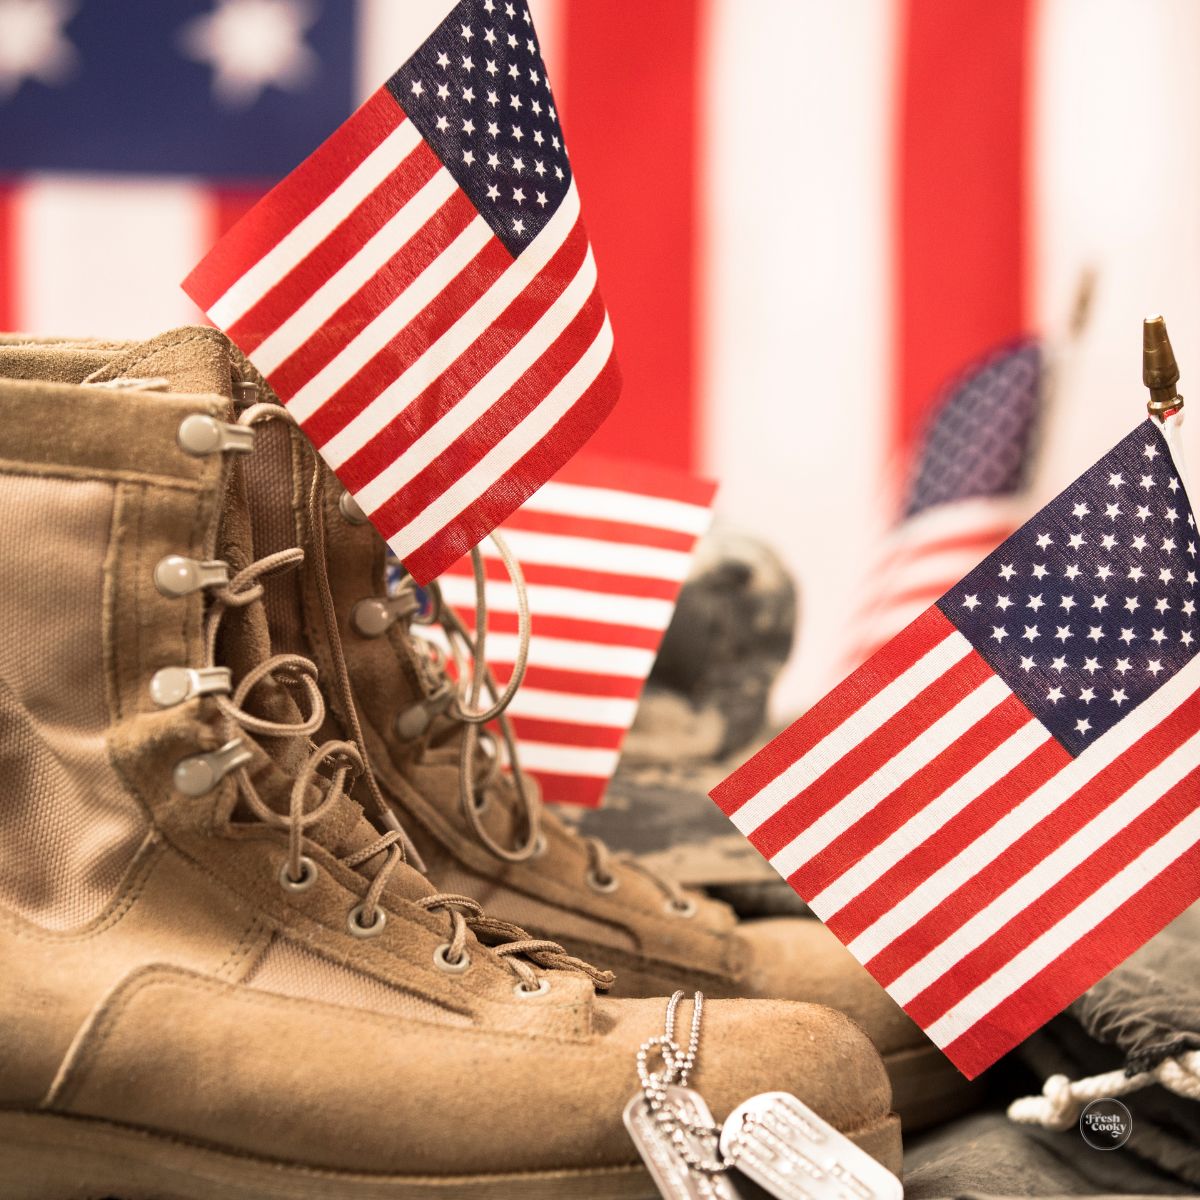 American flags in empty soldiers boots with dog tags, celebrating Memorial day.